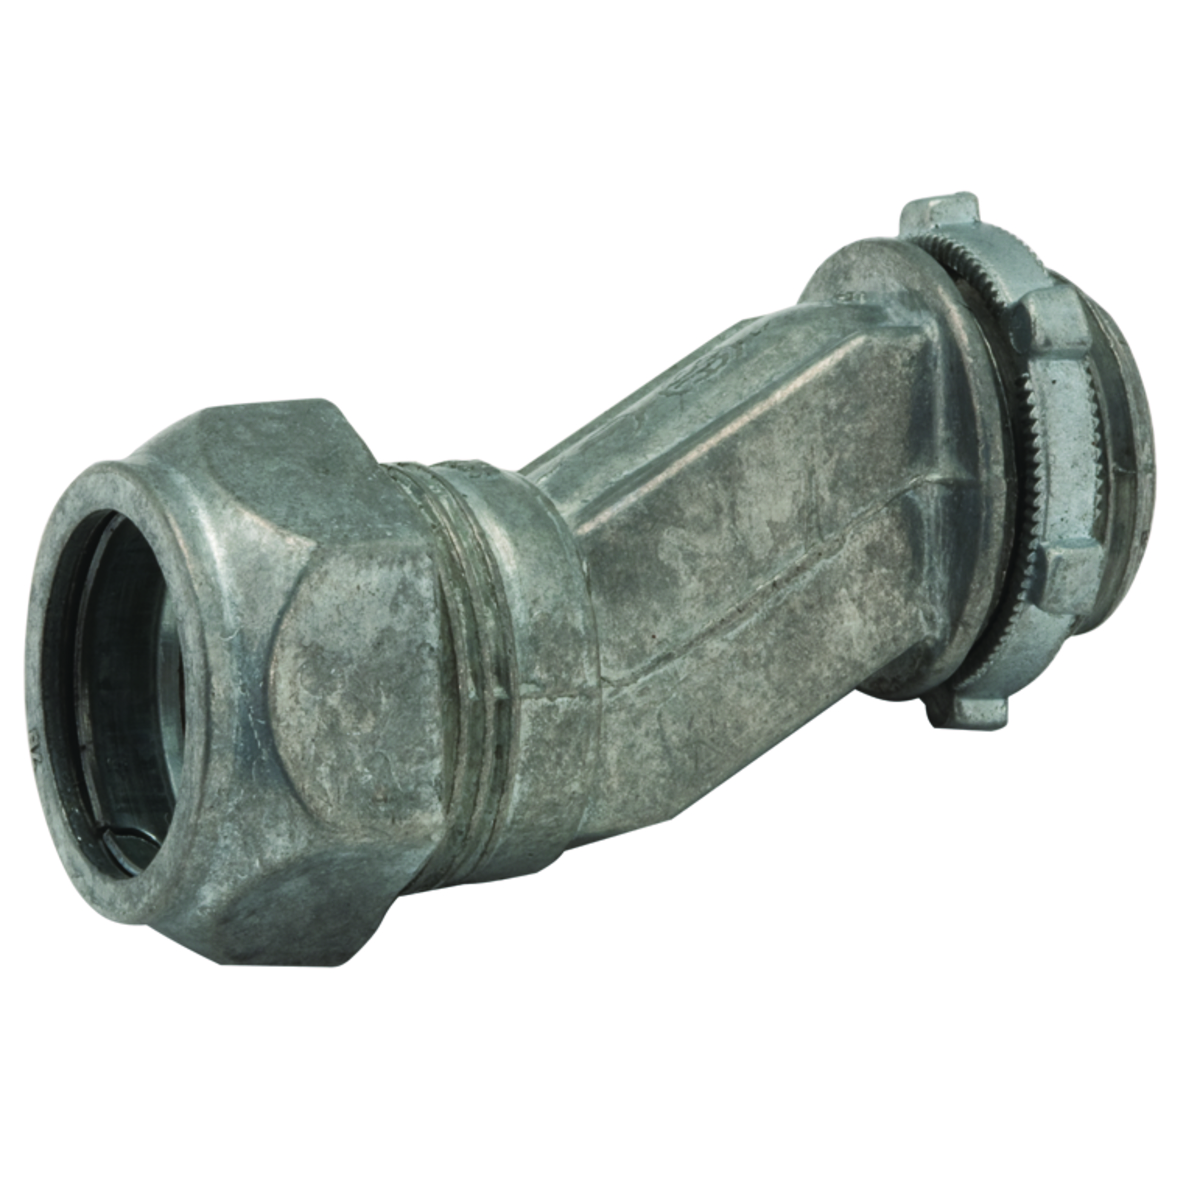 Offset Connector, Uninsulated Die Cast Zinc, 1/2 In. Trade Size